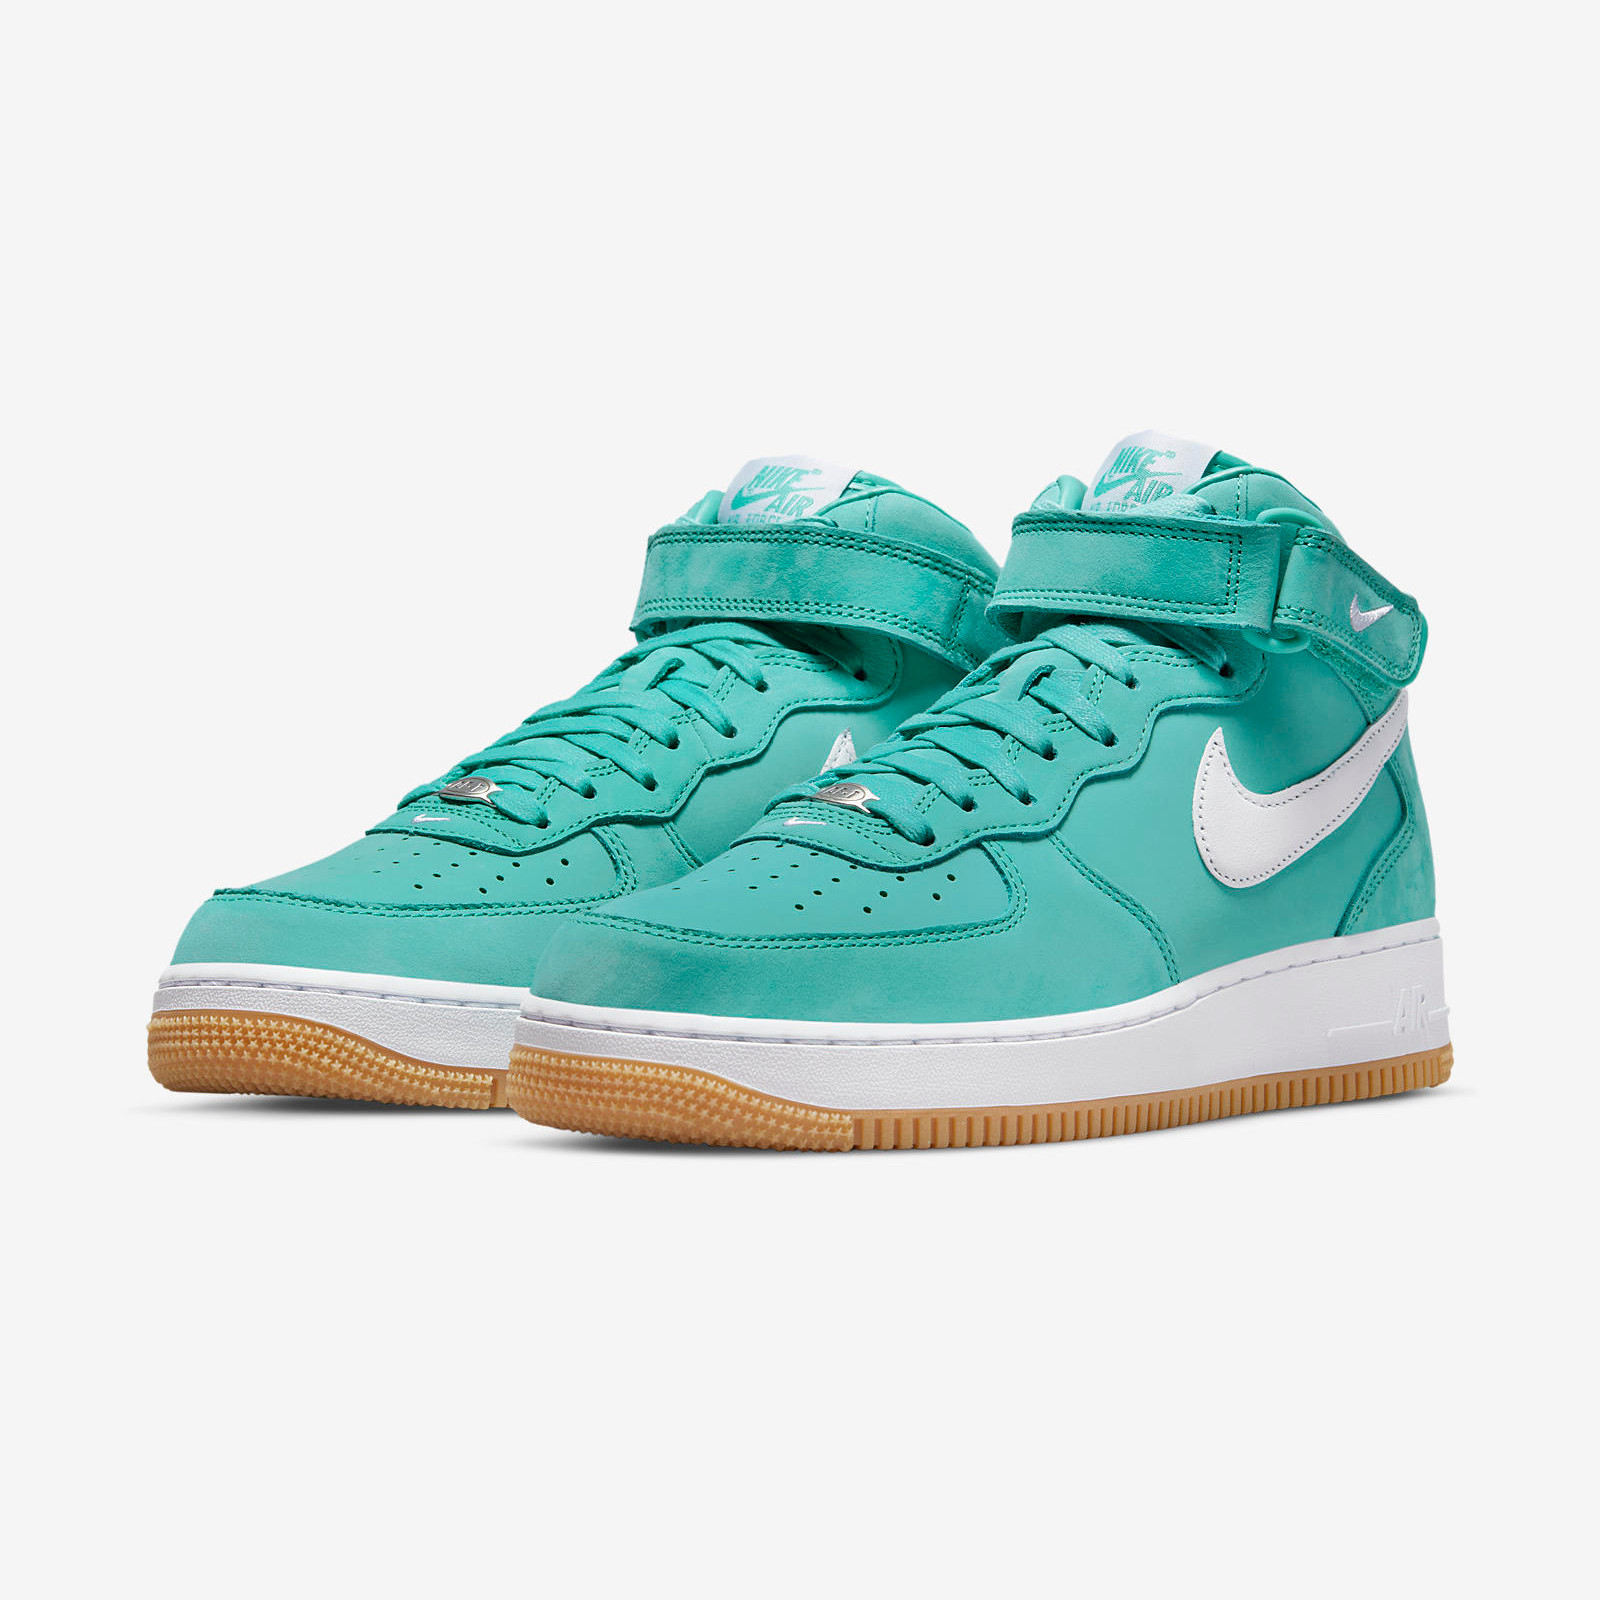 Nike Air Force 1 Mid
« Washed Teal »